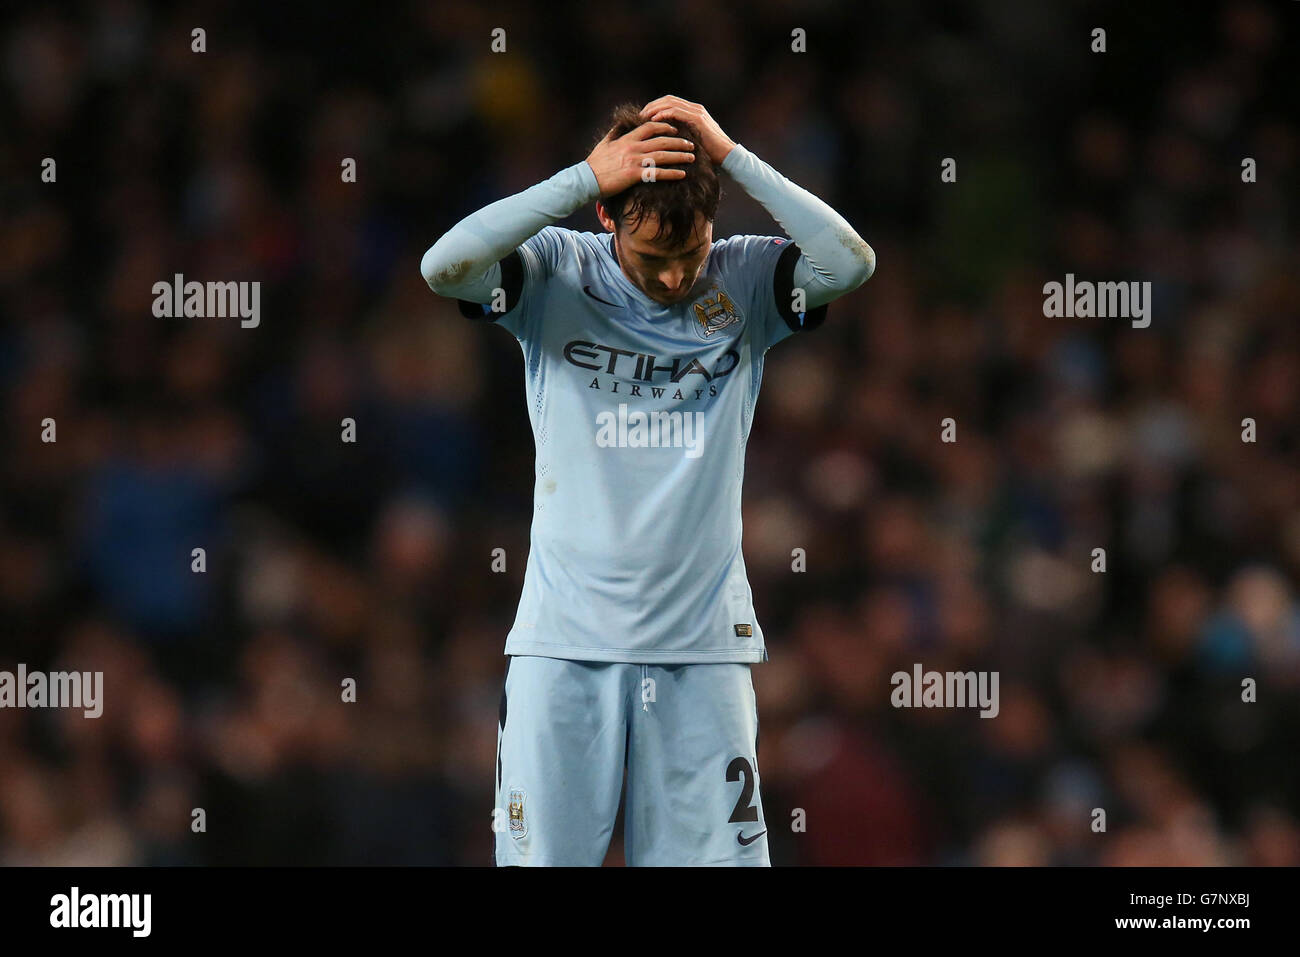 Soccer - UEFA Champions League - Round of 16 - First Leg - Manchester City v Barcelona - Etihad Stadium. Manchester City's David Silva stands dejected Stock Photo